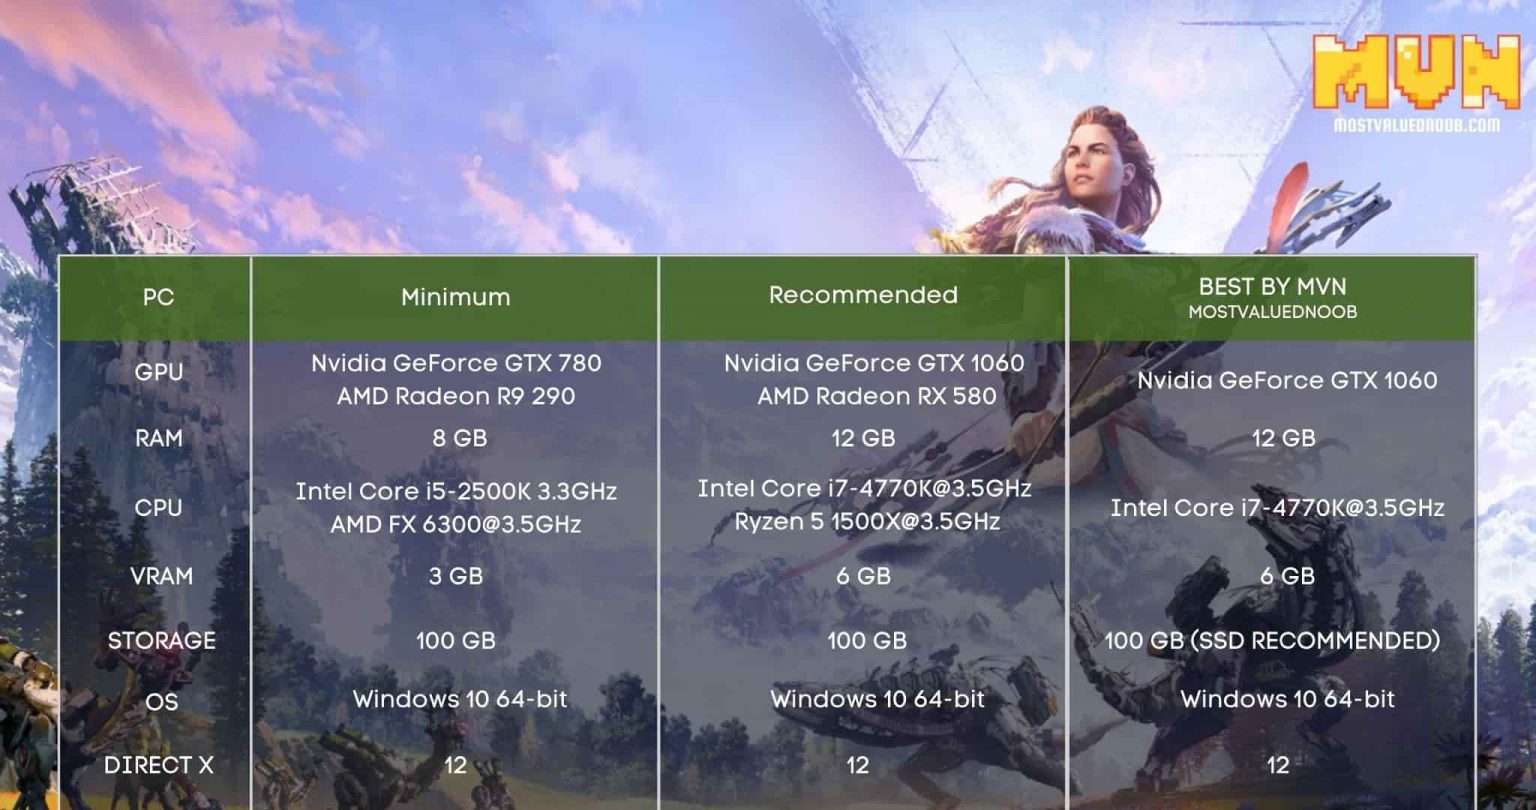 Horizon Zero Dawn System Requirements - Can I run it on my PC?